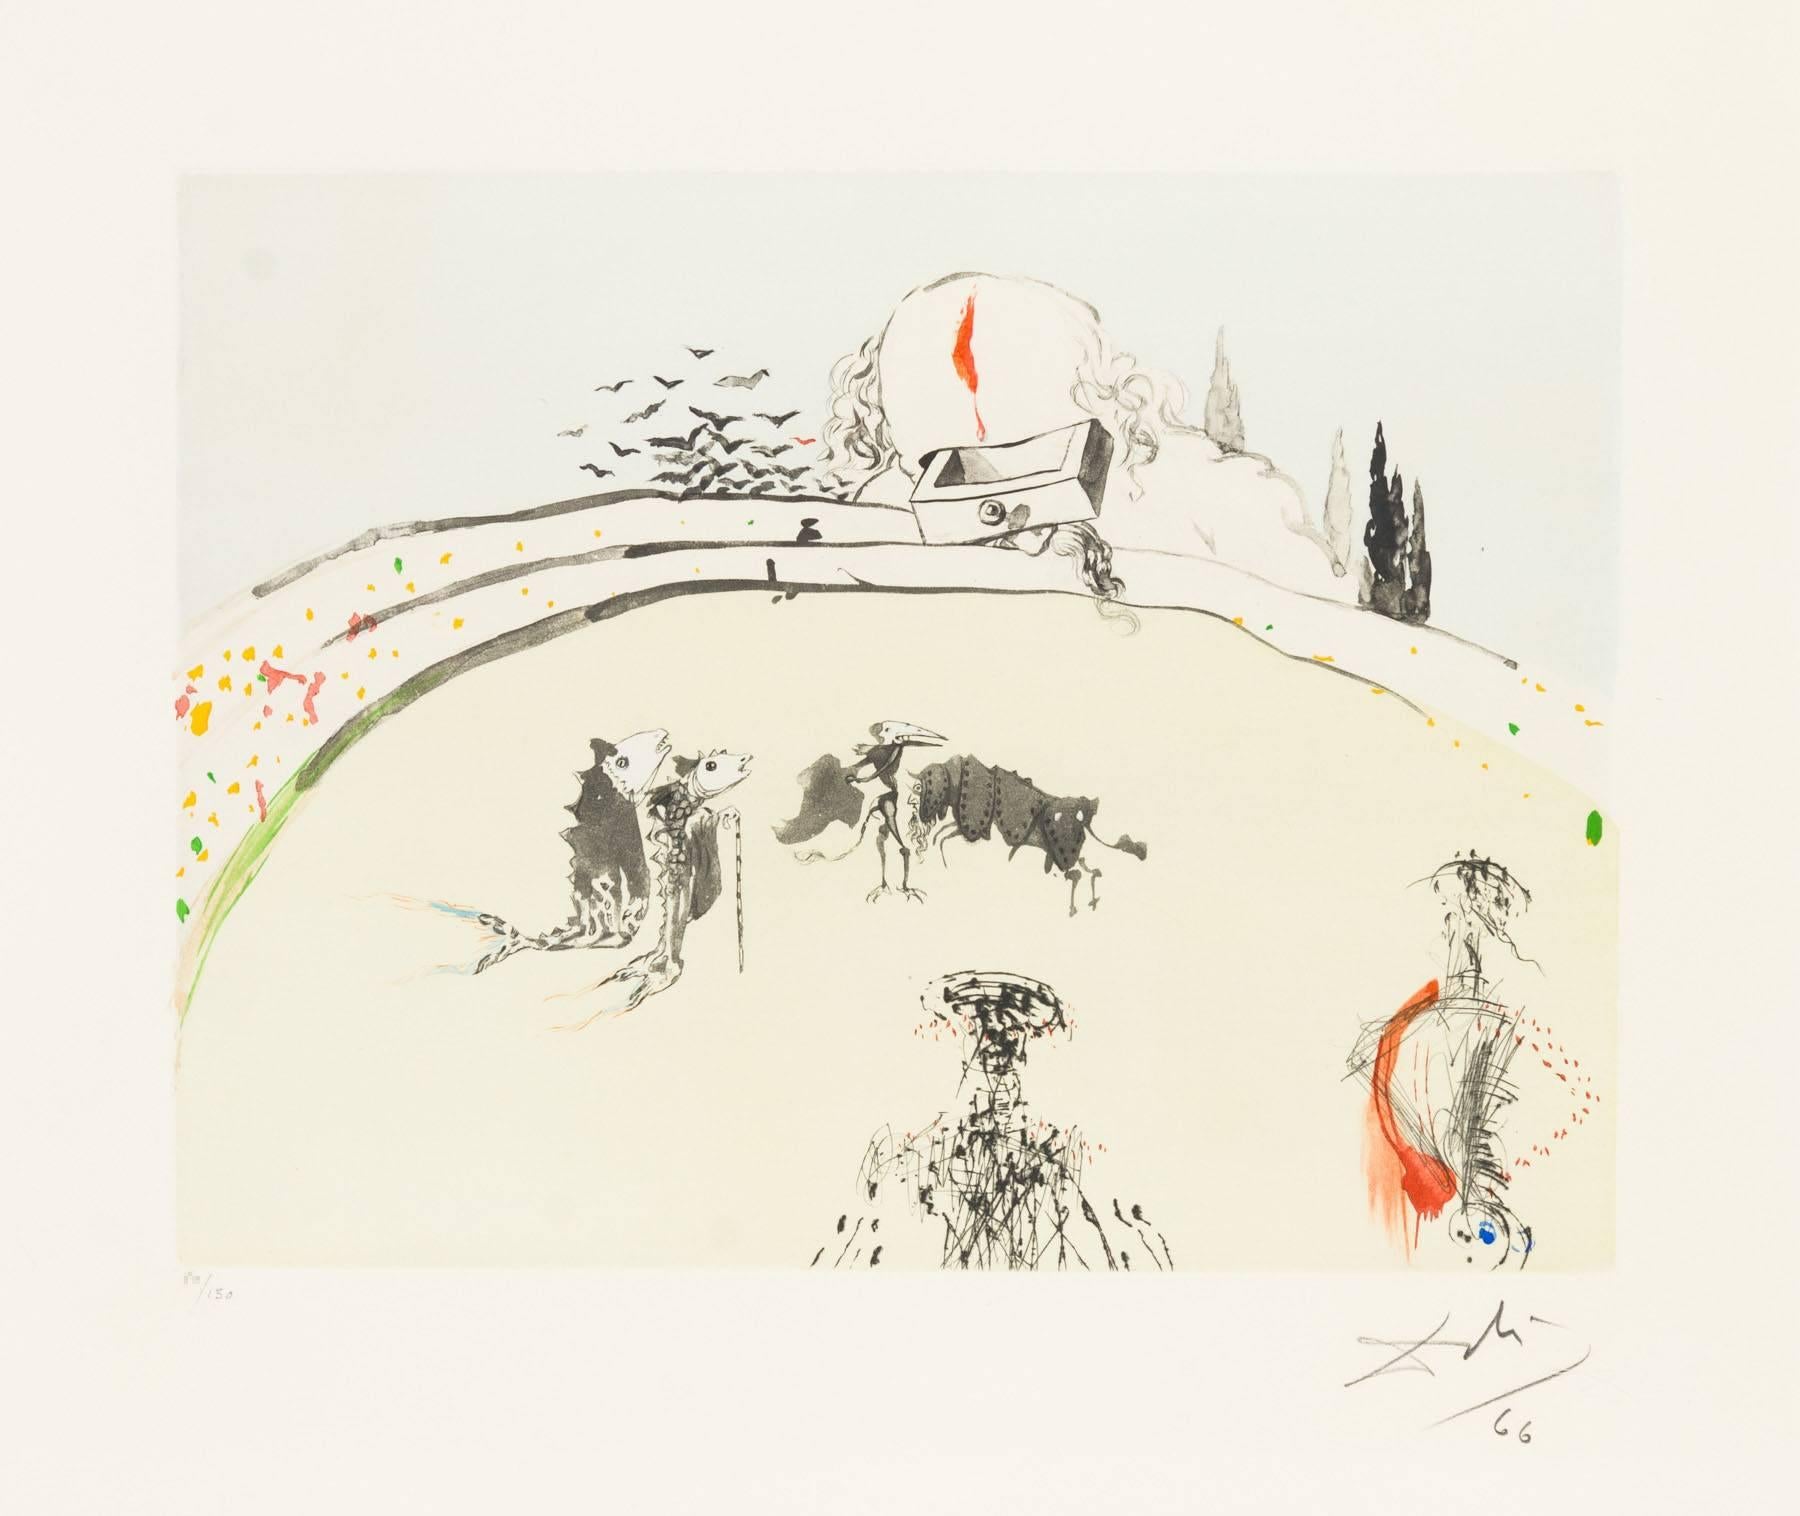 Bullfight in a Drawer - Print by Salvador Dalí